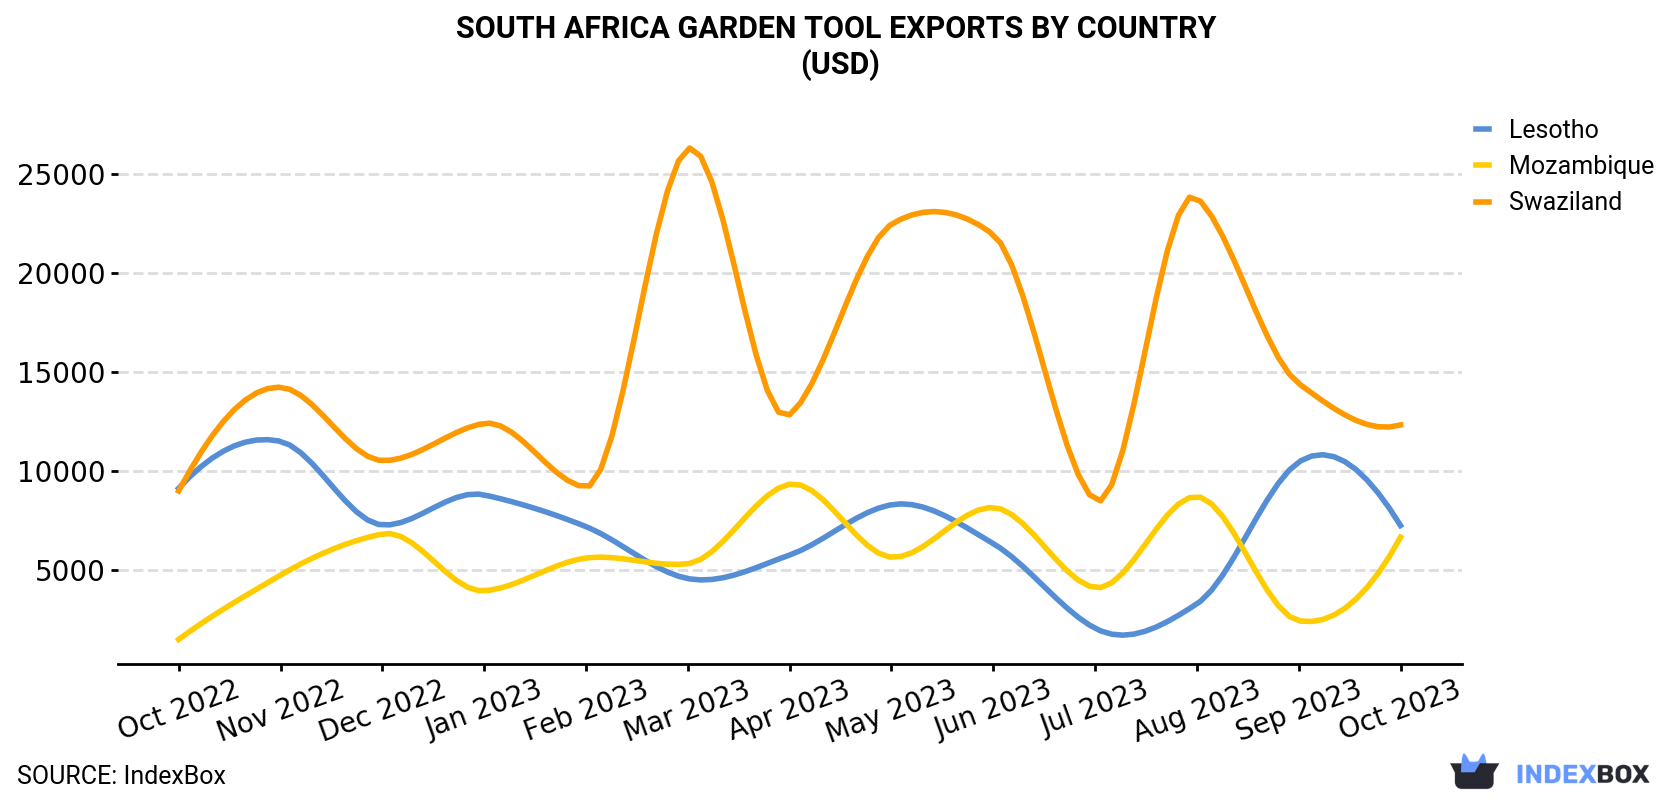 South Africa Garden Tool Exports By Country (USD)